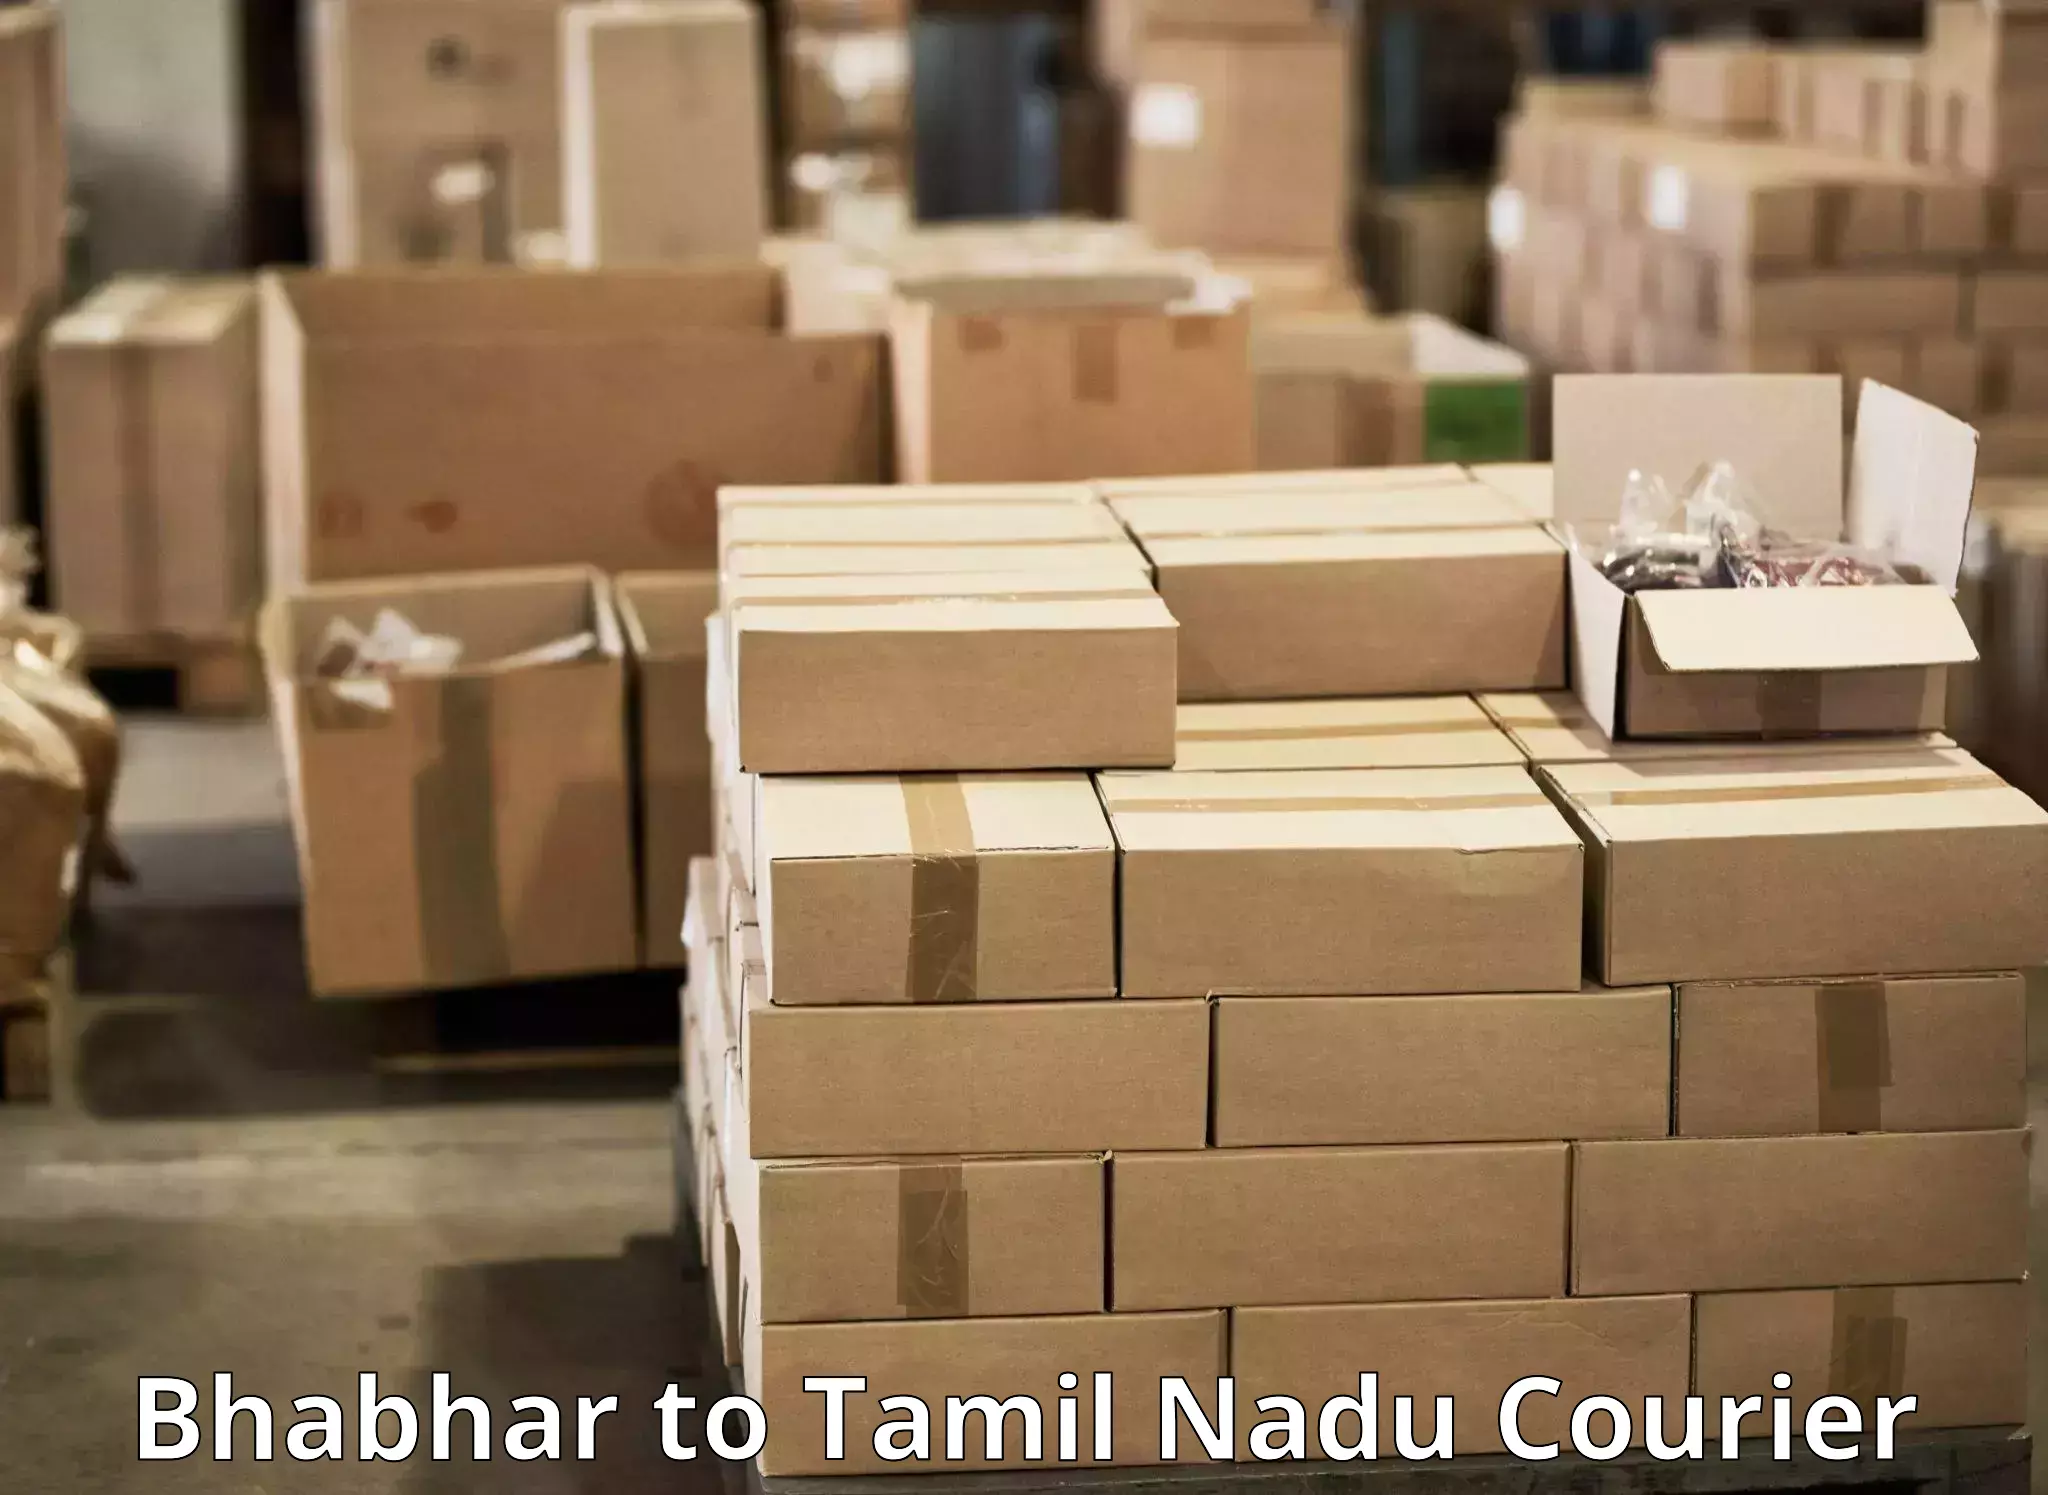 Round-the-clock parcel delivery Bhabhar to Tamil Nadu